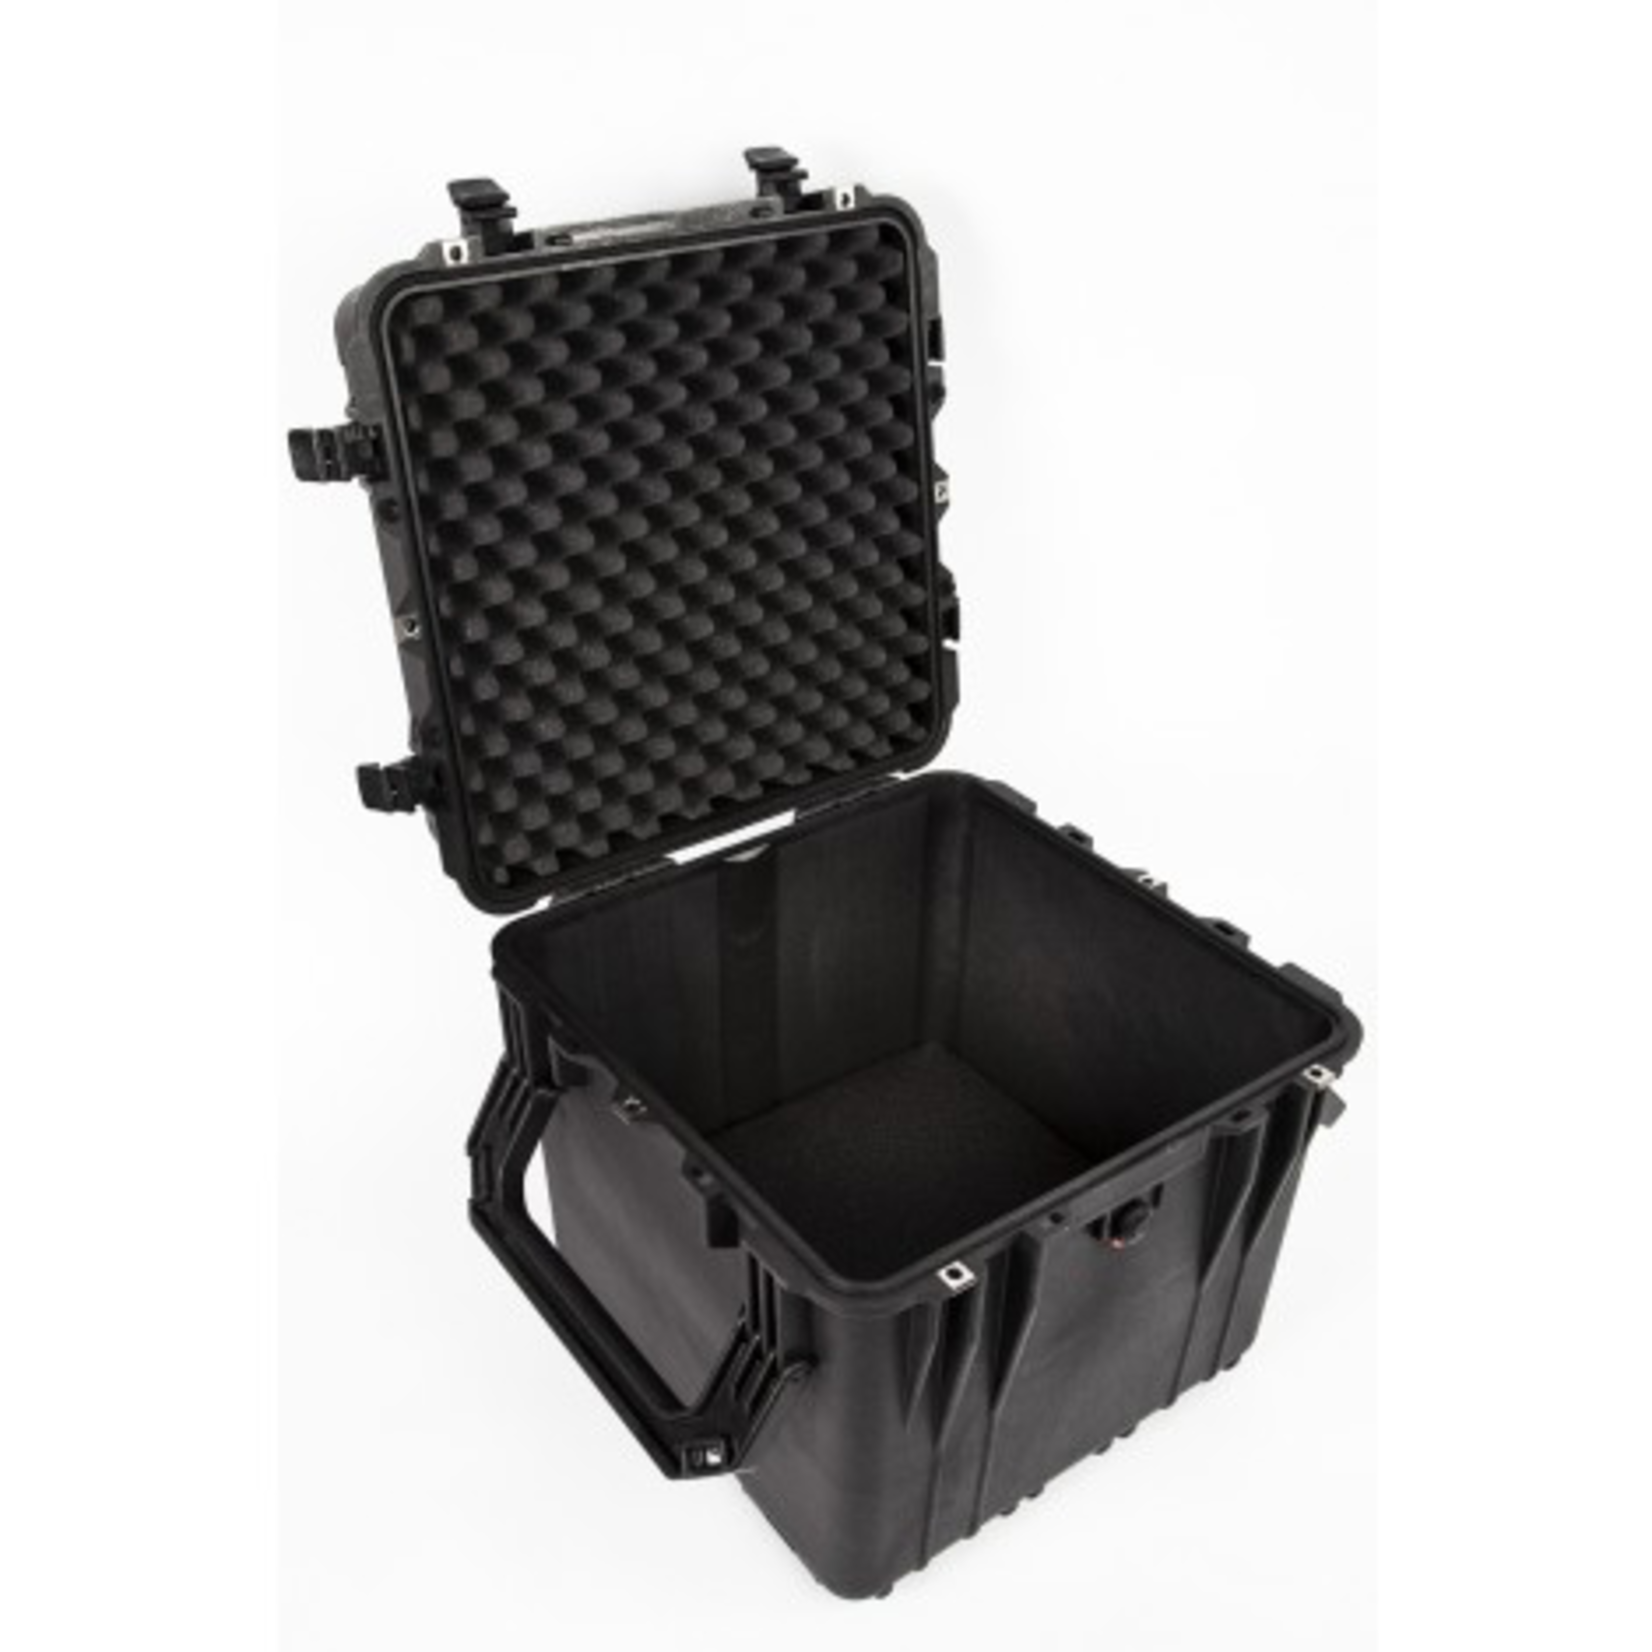 PORTABLE WINCH CO. Case, Waterproof And Airtight With Removable Casters And Folding Top Handle For Winches And Accessories